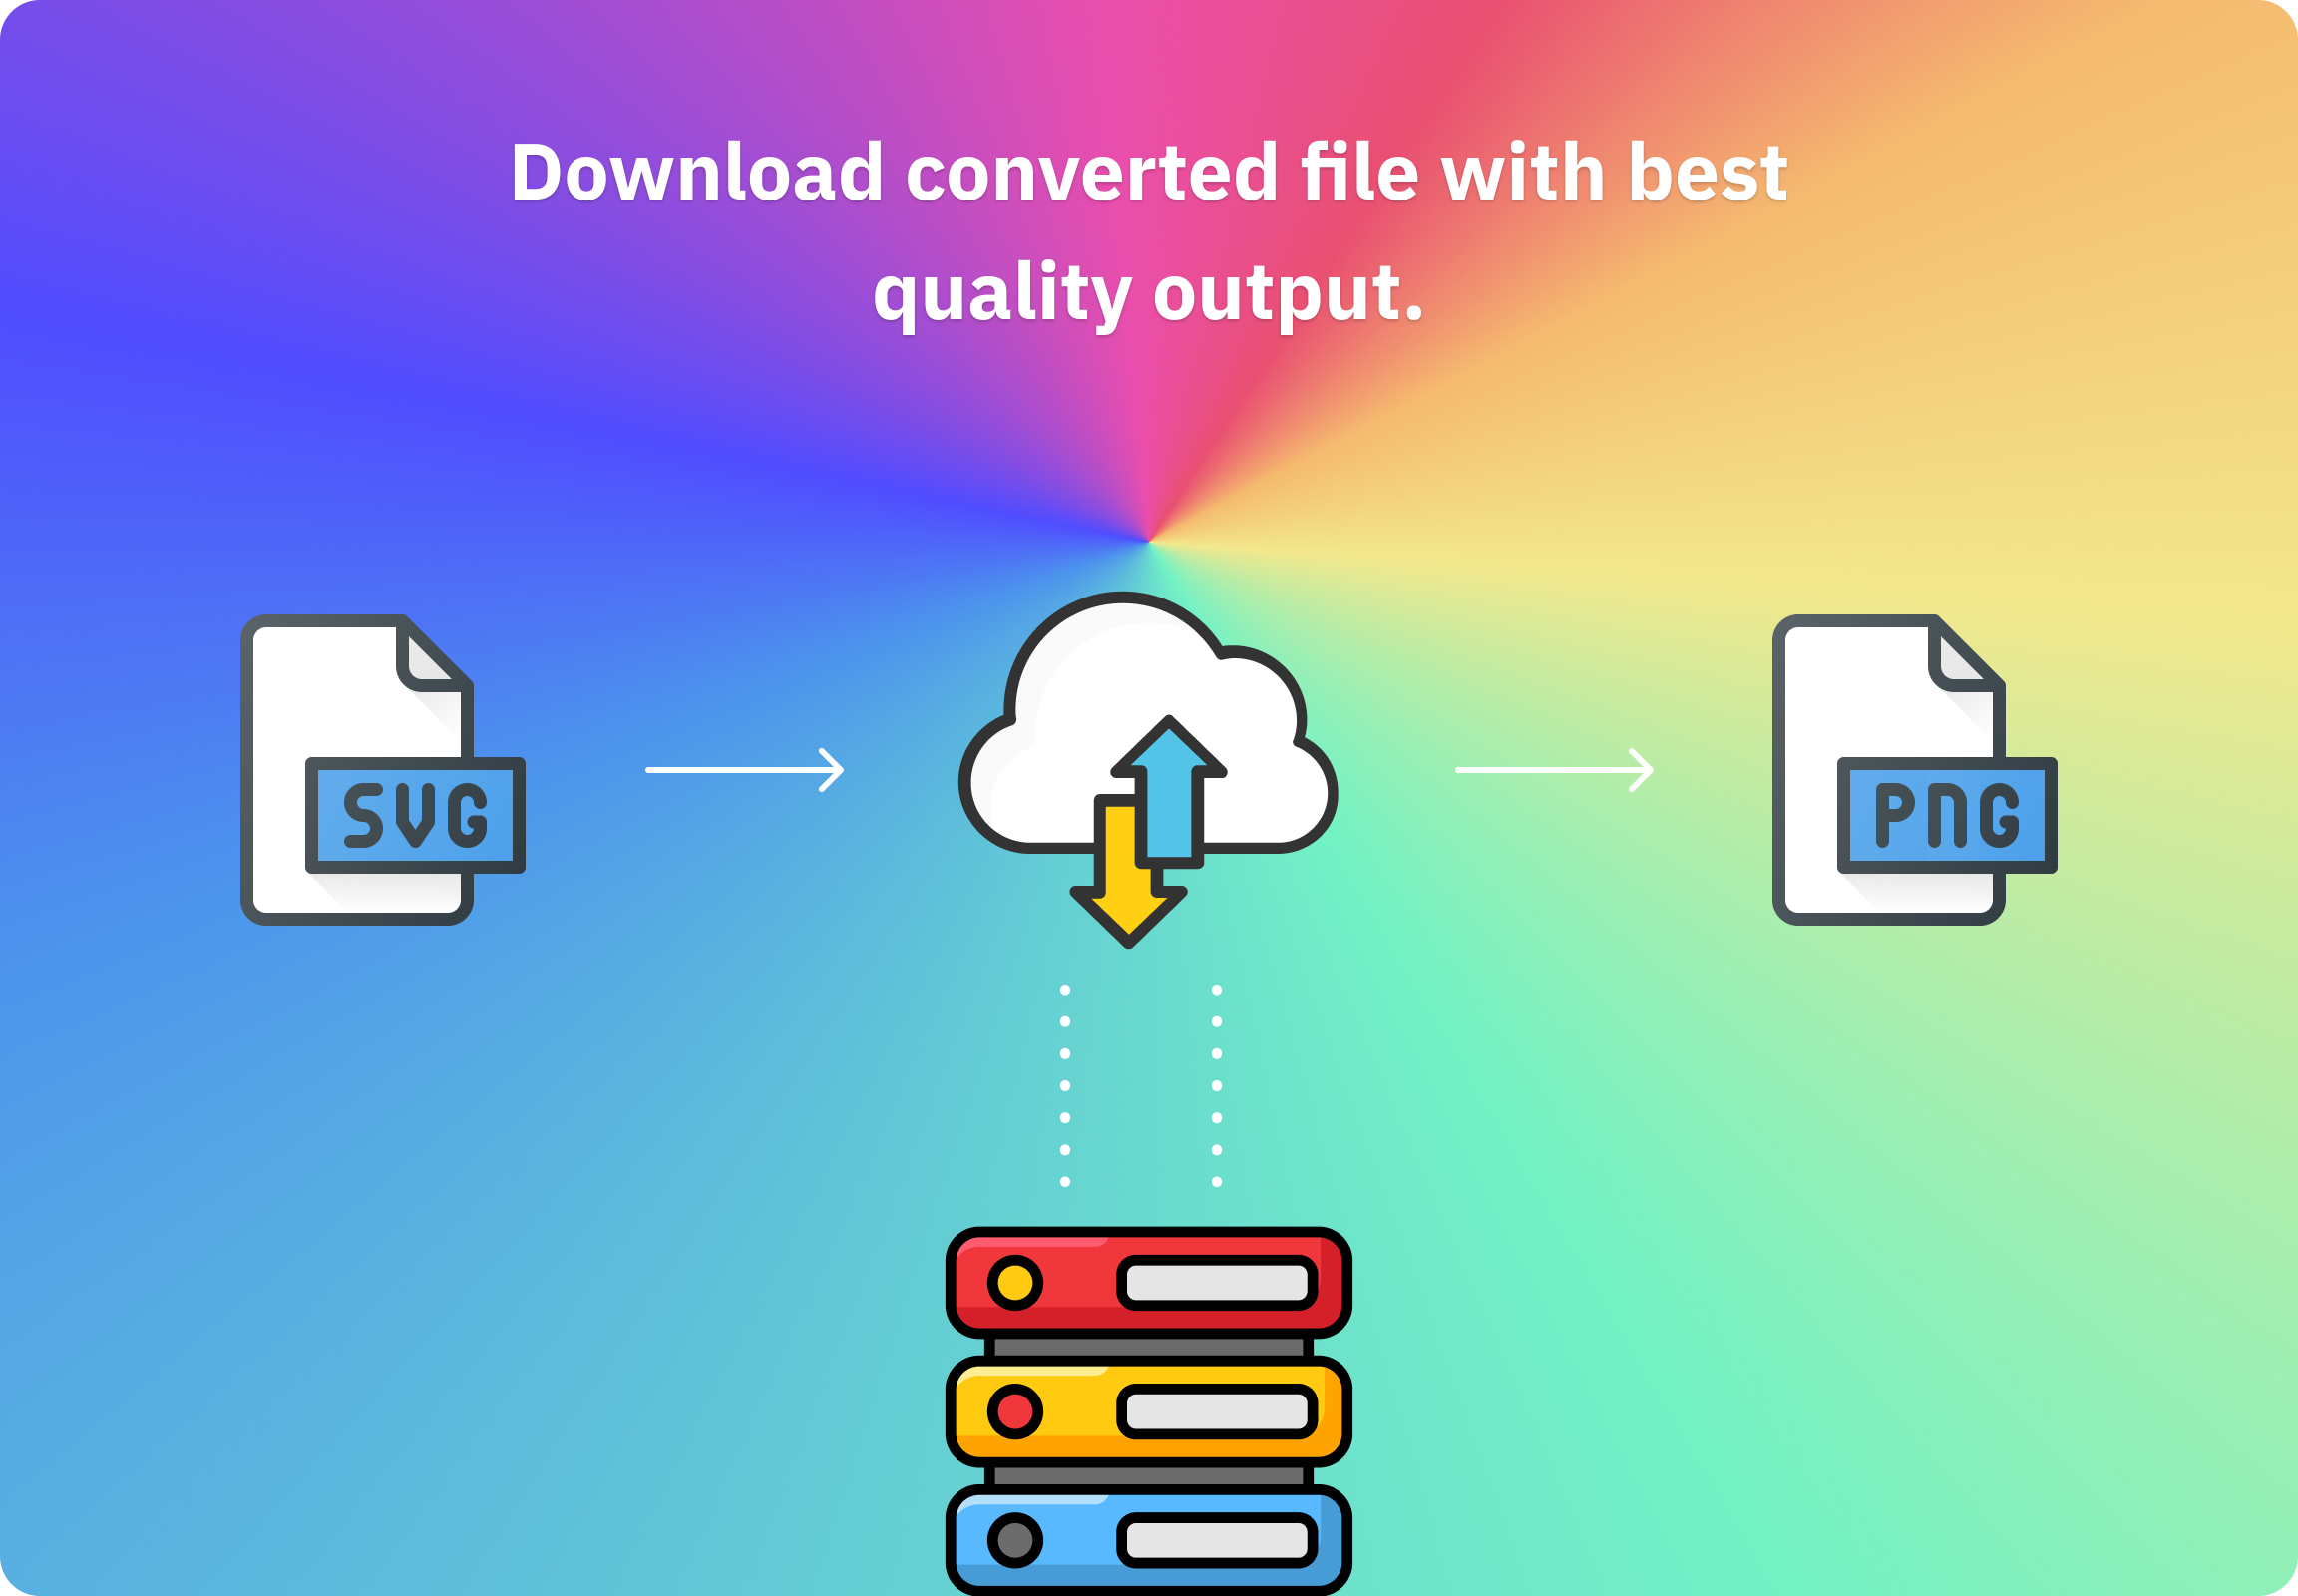 Data File Converter 5.3.4 download the new version for android